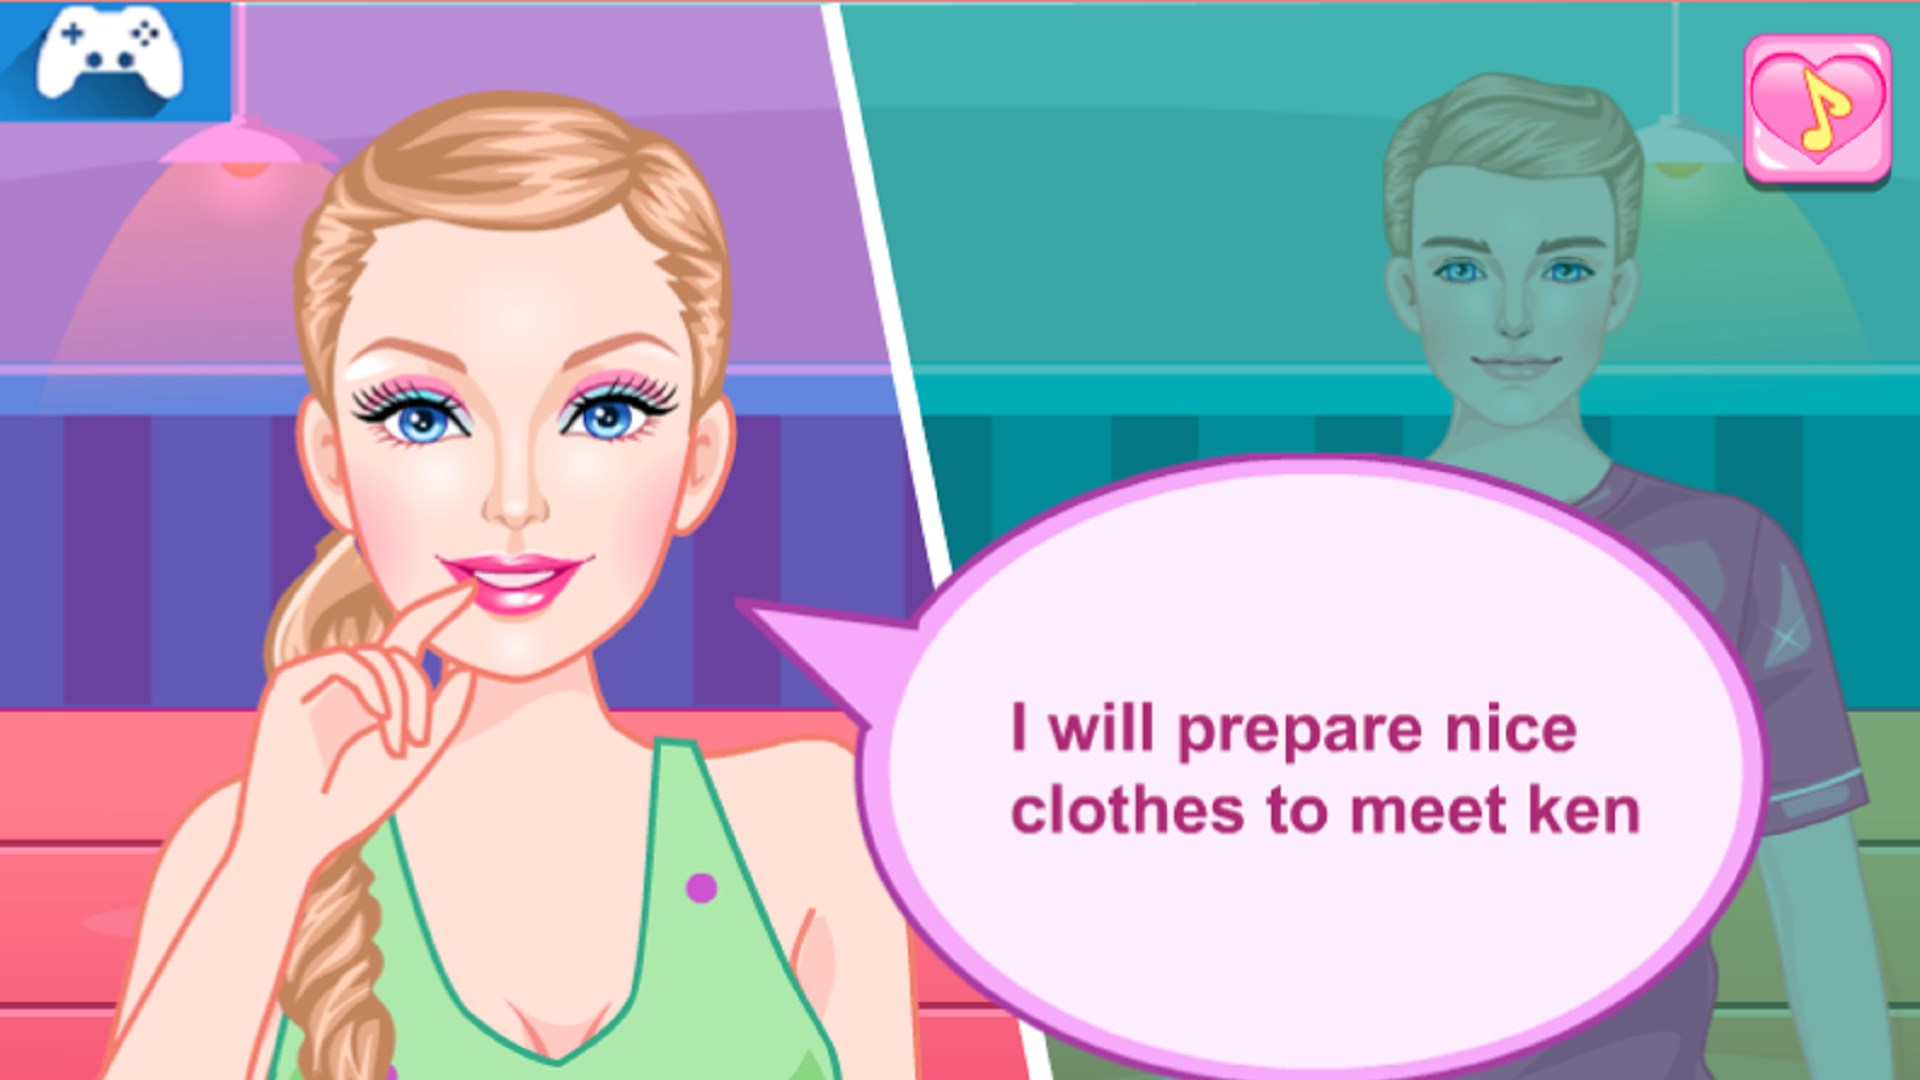 barbie games for girls download